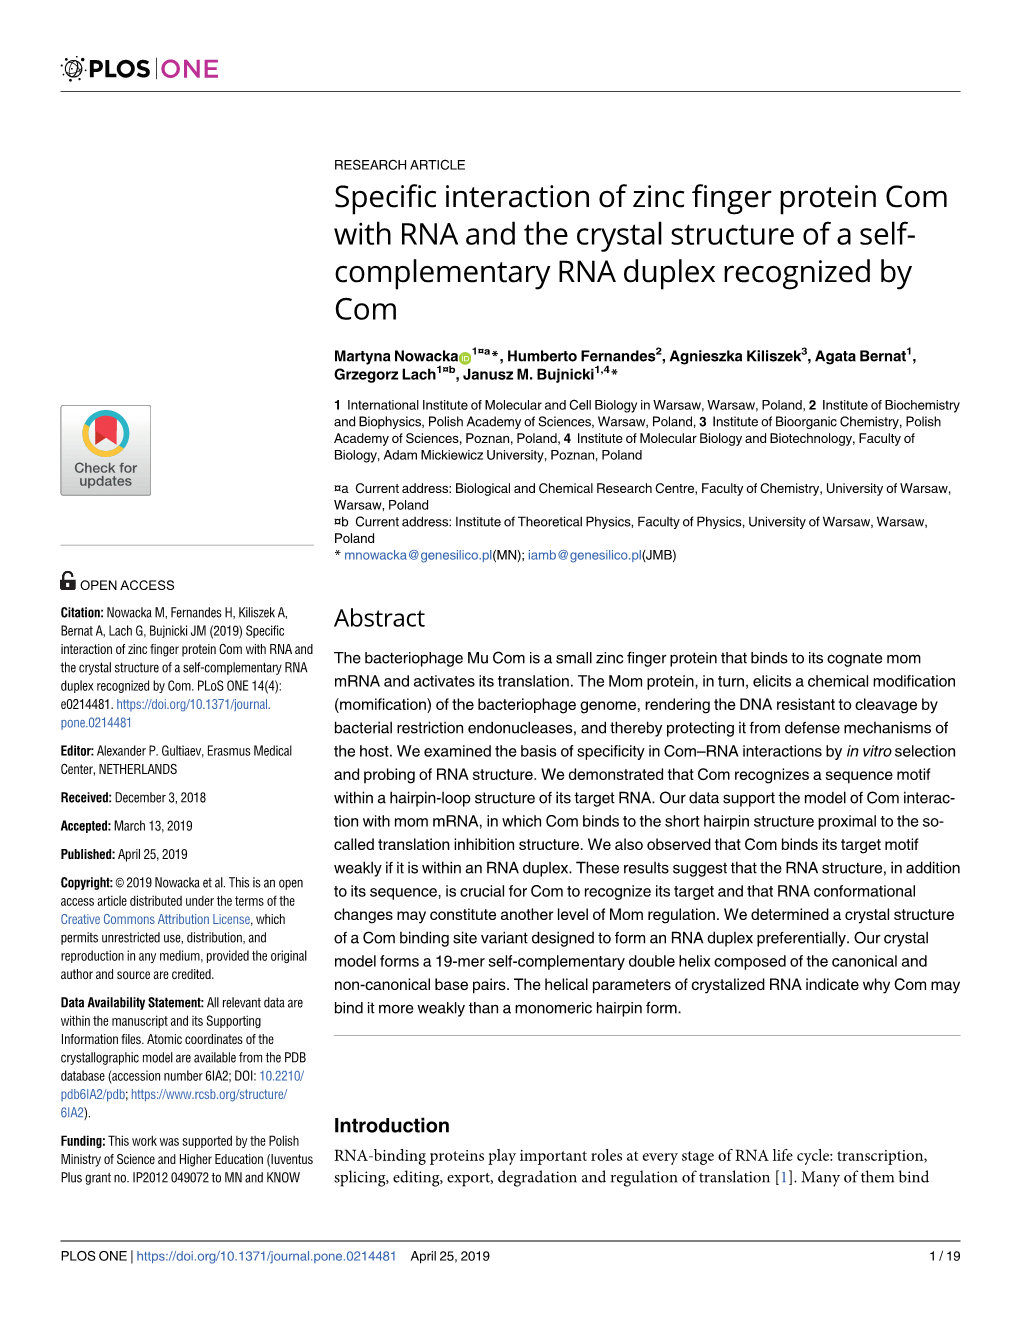 Specific Interaction of Zinc Finger Protein Com with RNA and the Crystal Structure of a Self- Complementary RNA Duplex Recognized by Com